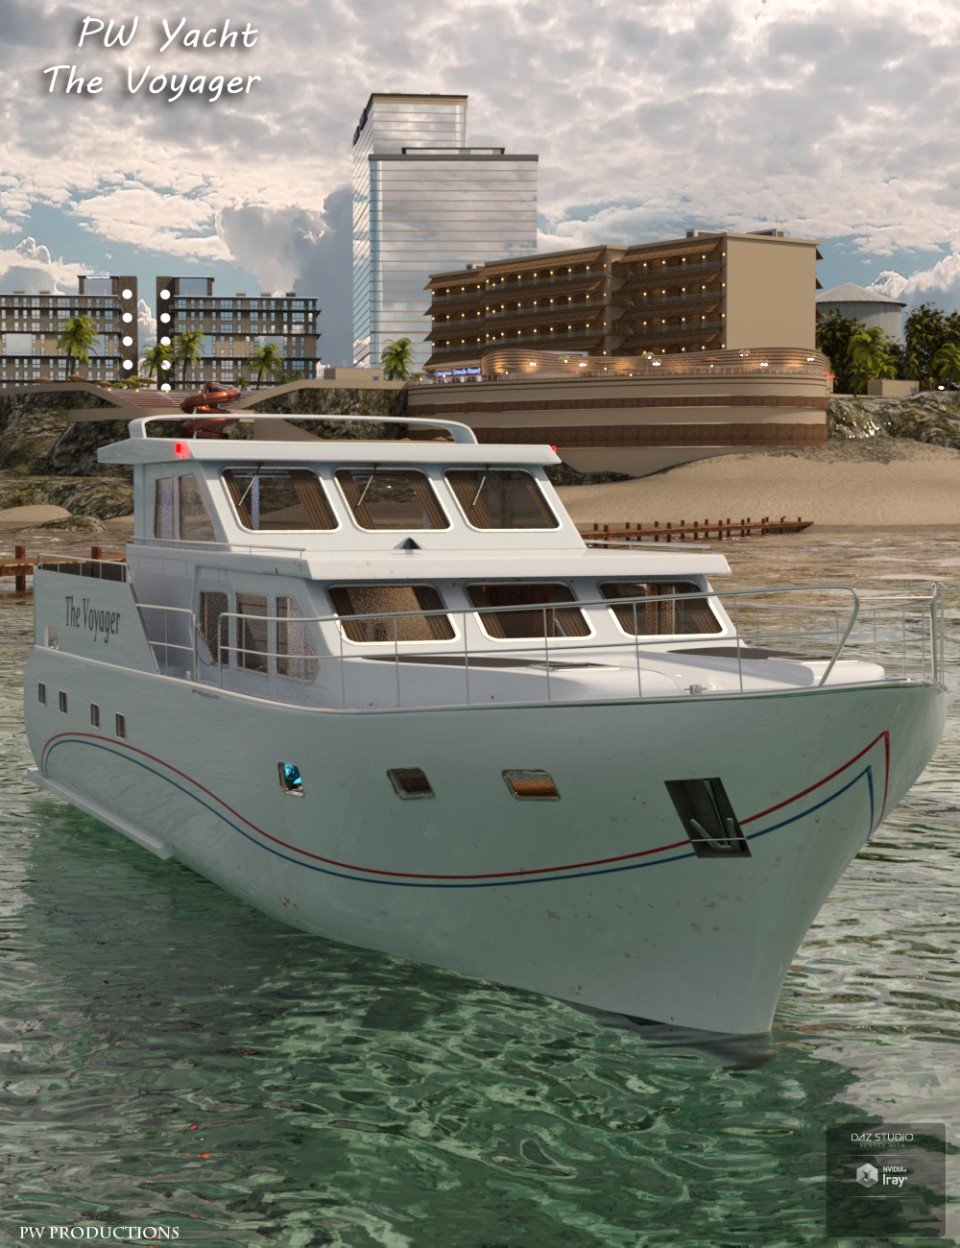 PW Yacht The Voyager_DAZ3DDL